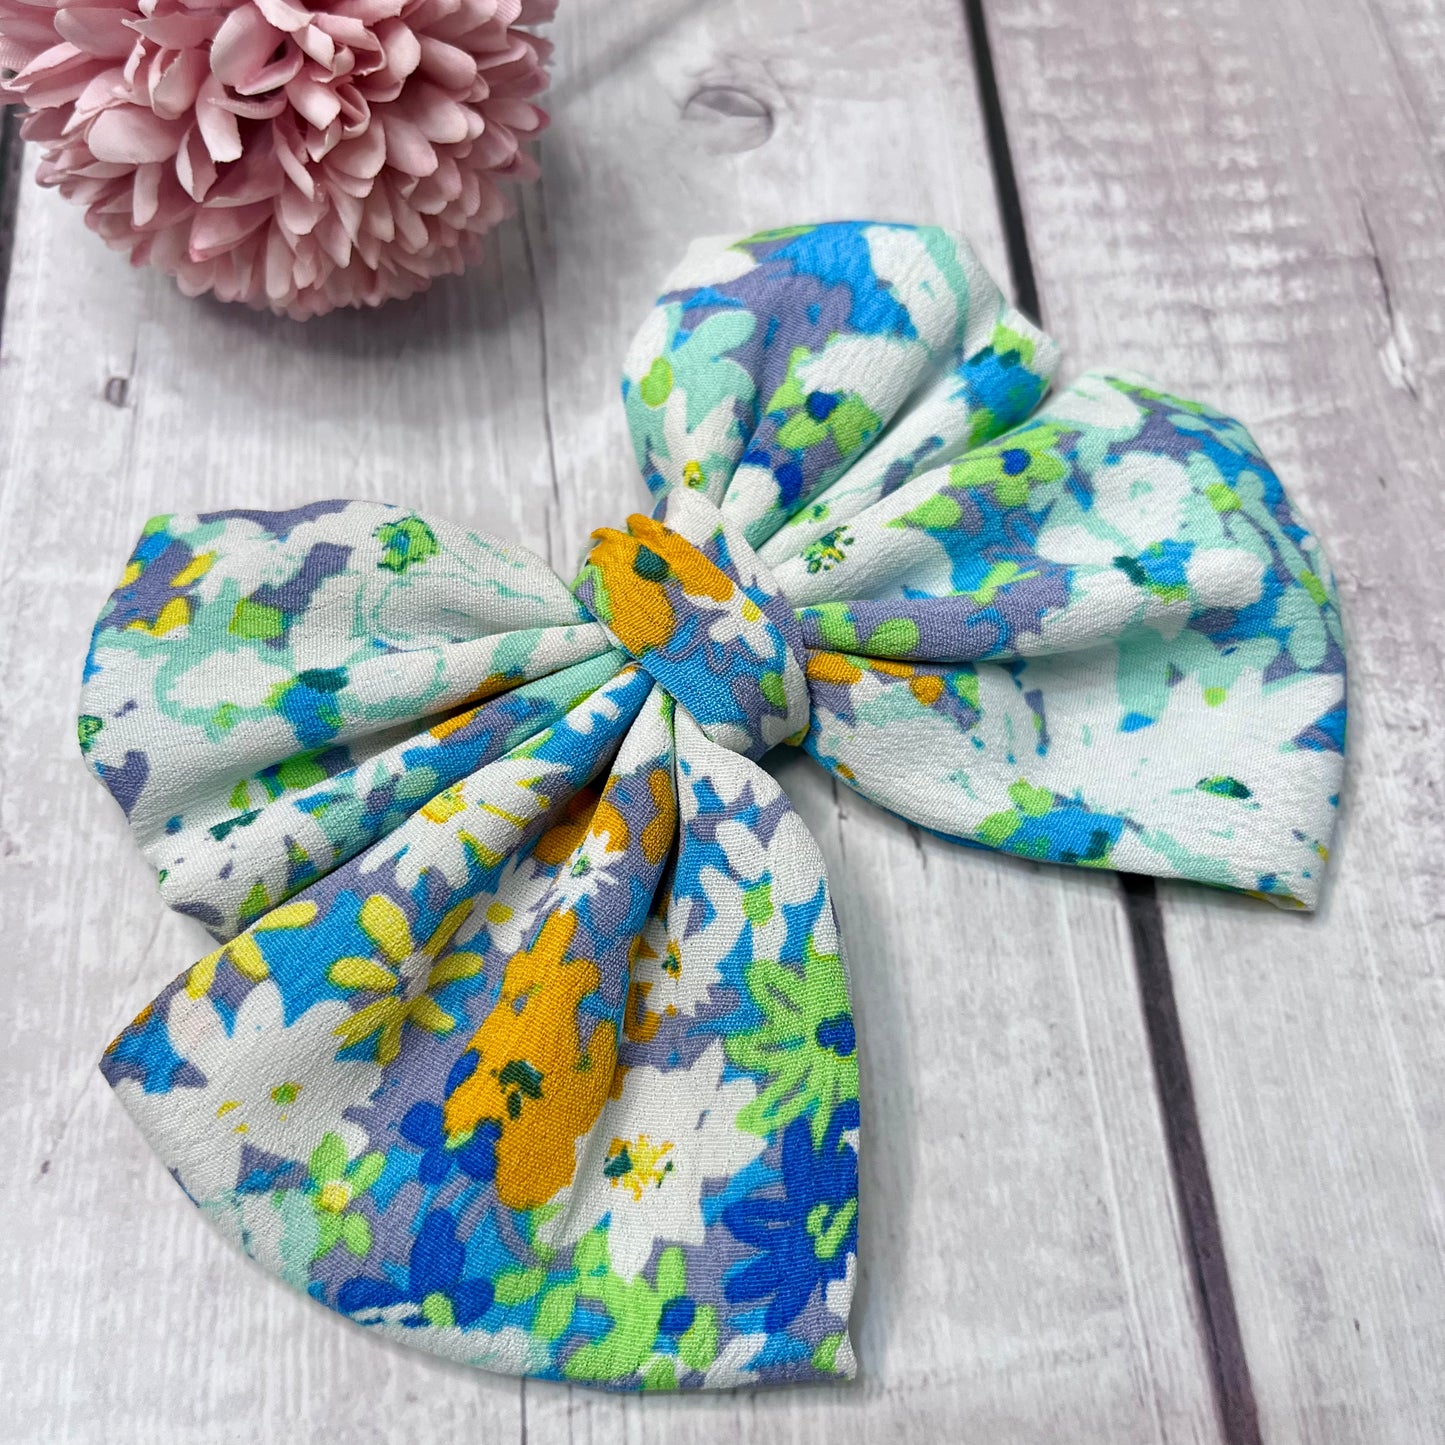 Floral Beauty Multi Layered Bow Hair Clip